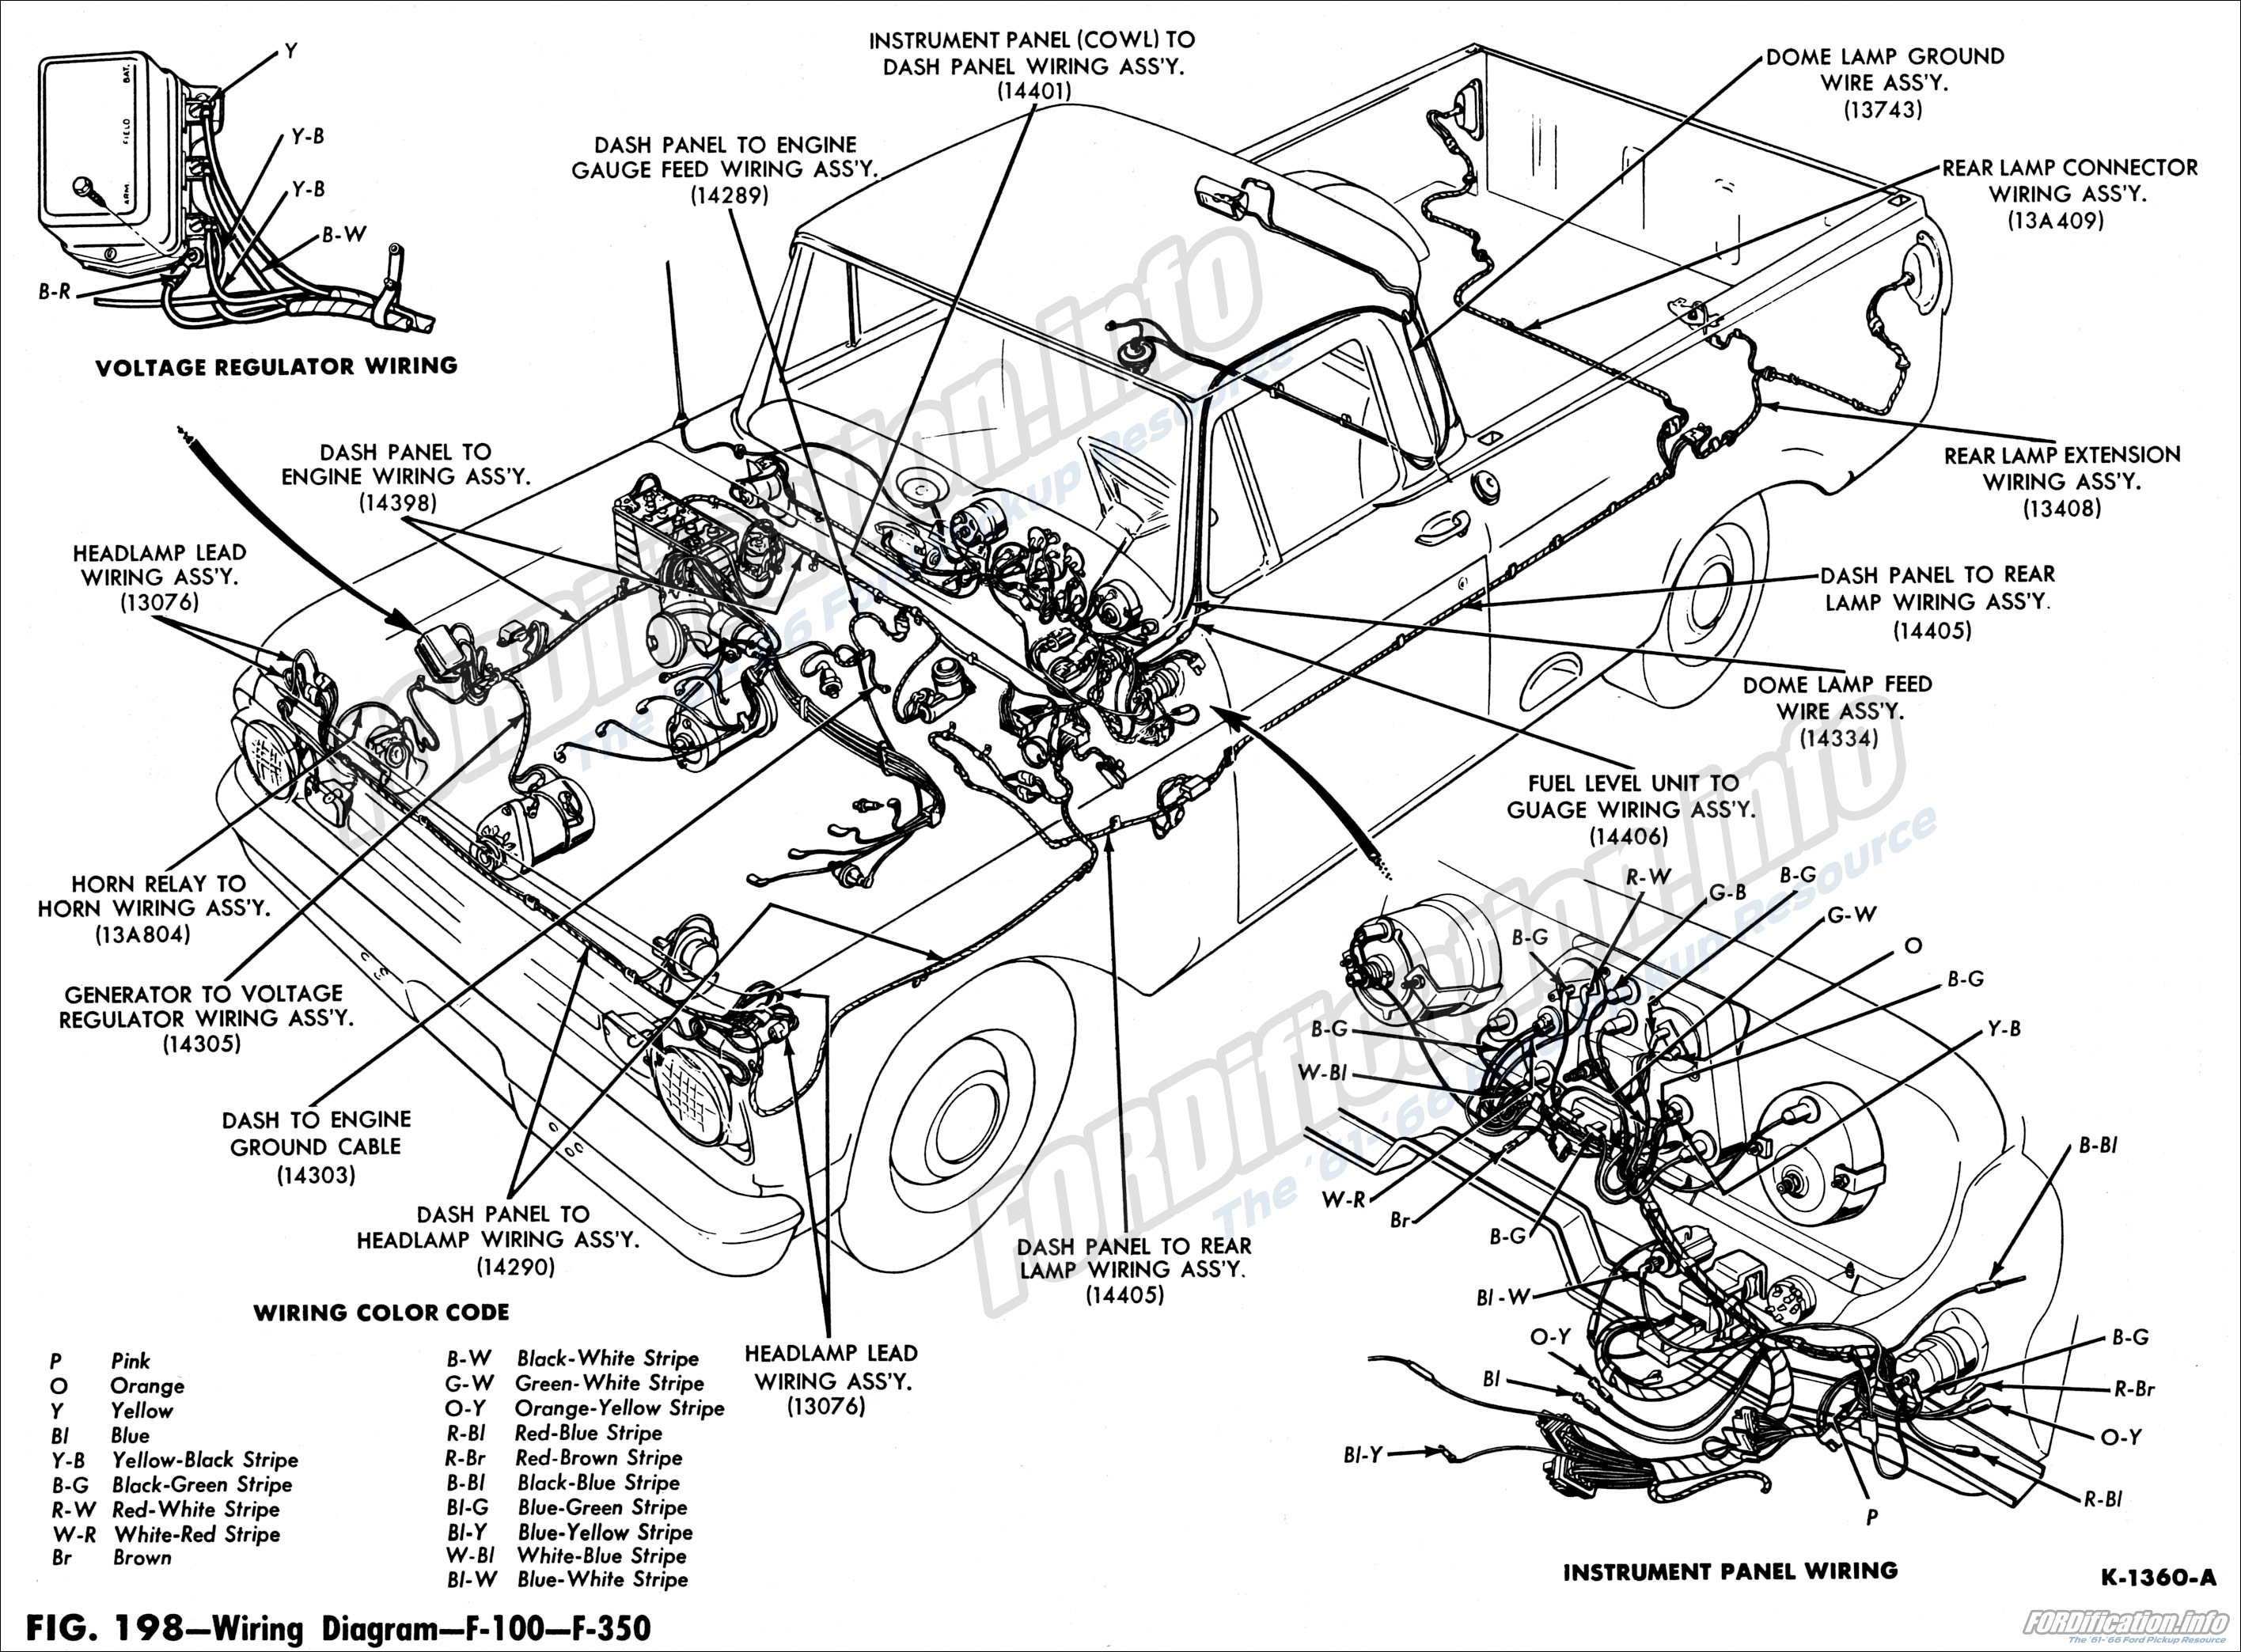 1963 Ford Truck Wiring Diagrams - FORDification.info - The '61-'66 Ford  Pickup Resource 1963 Ford Falcon Interior FORDification.info